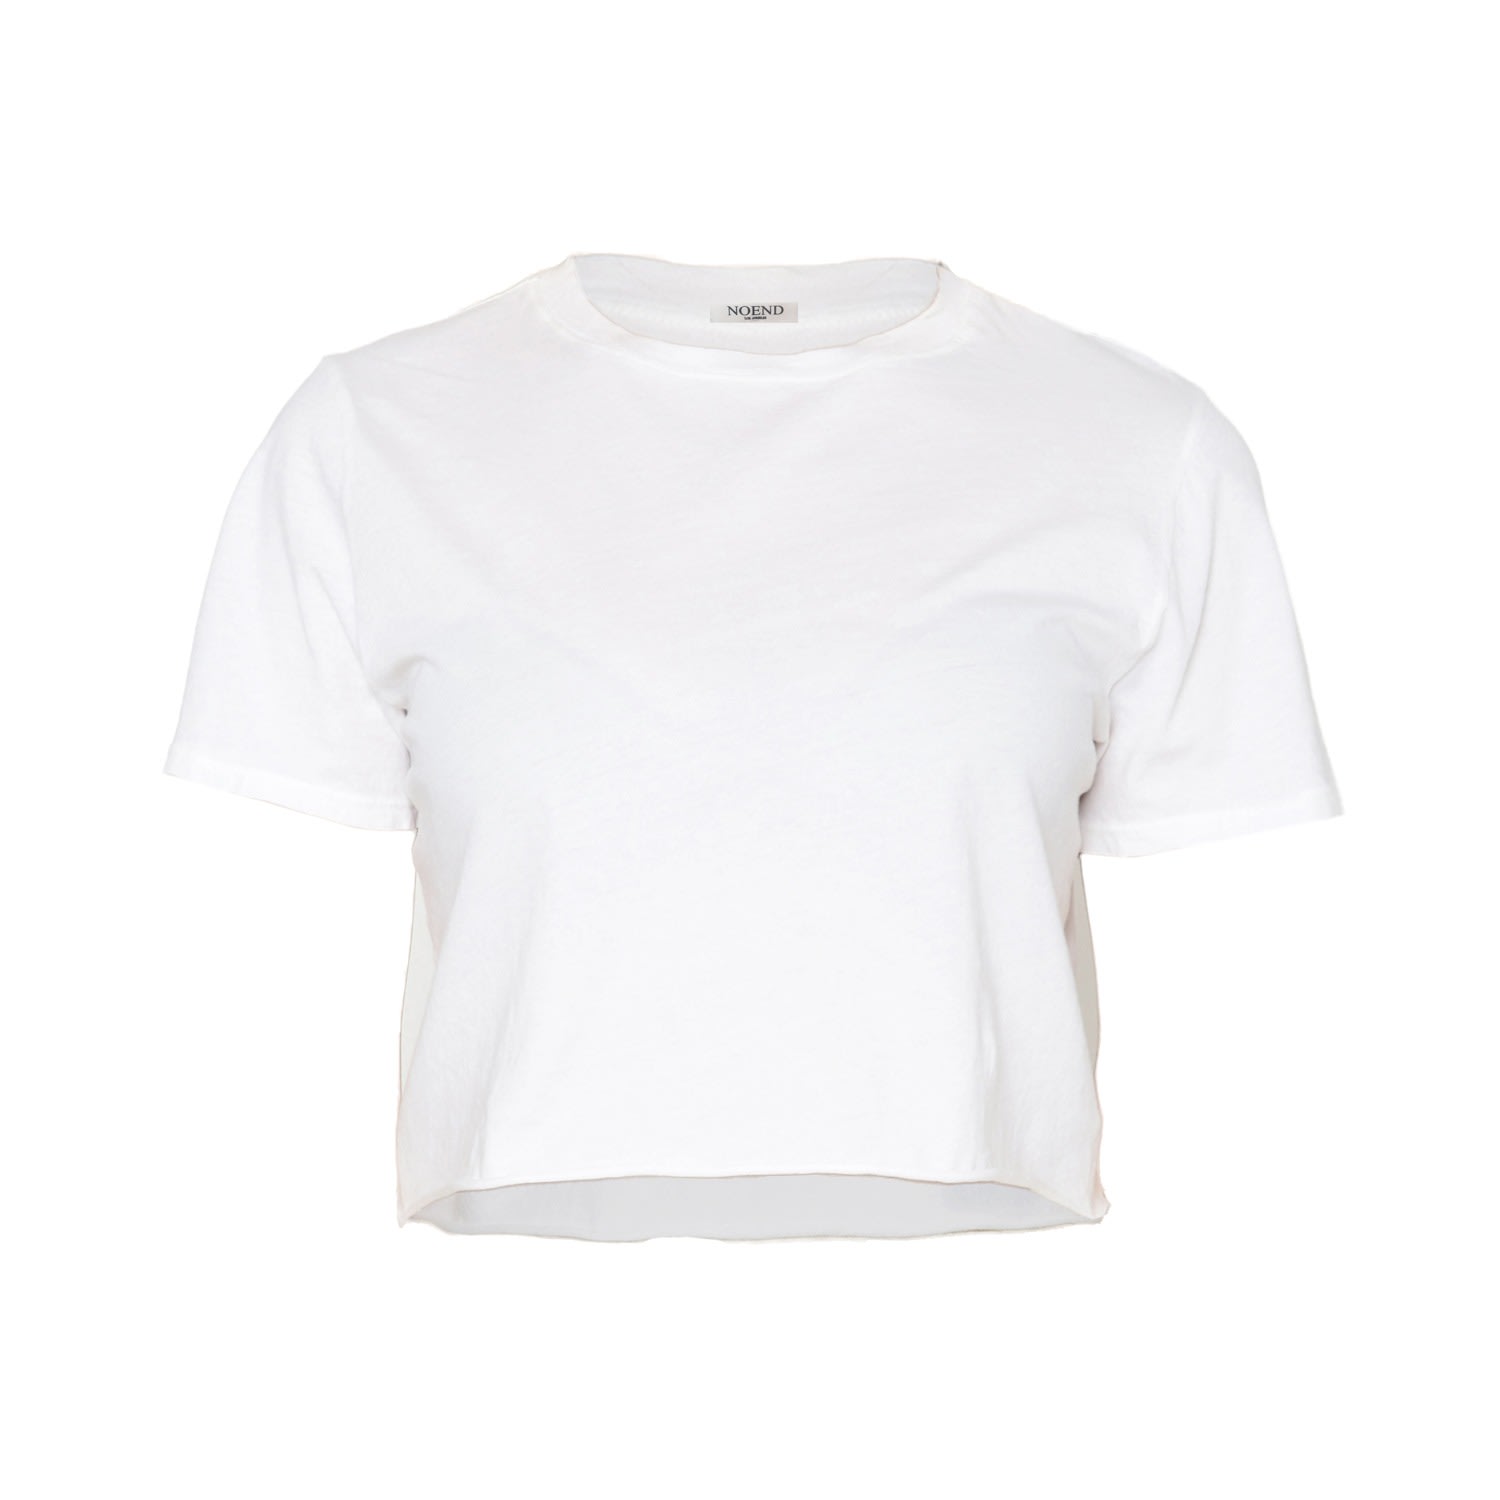 Noend Denim Women's Cropped Loose Tee - White